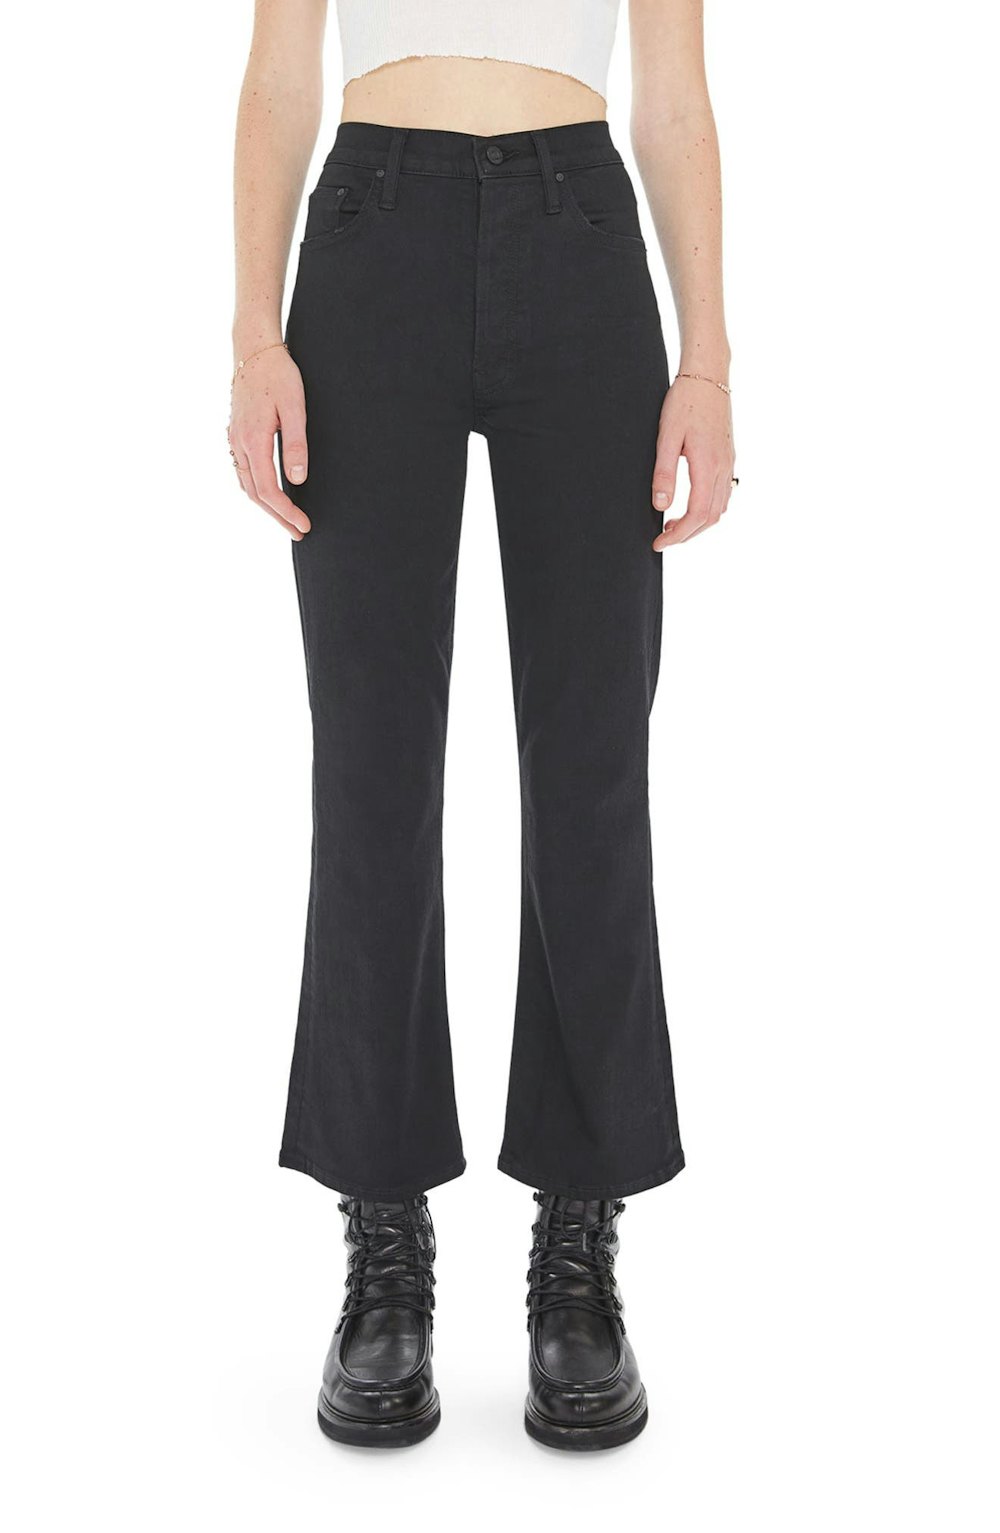 The Tripper High Waist Ankle Flare Jeans